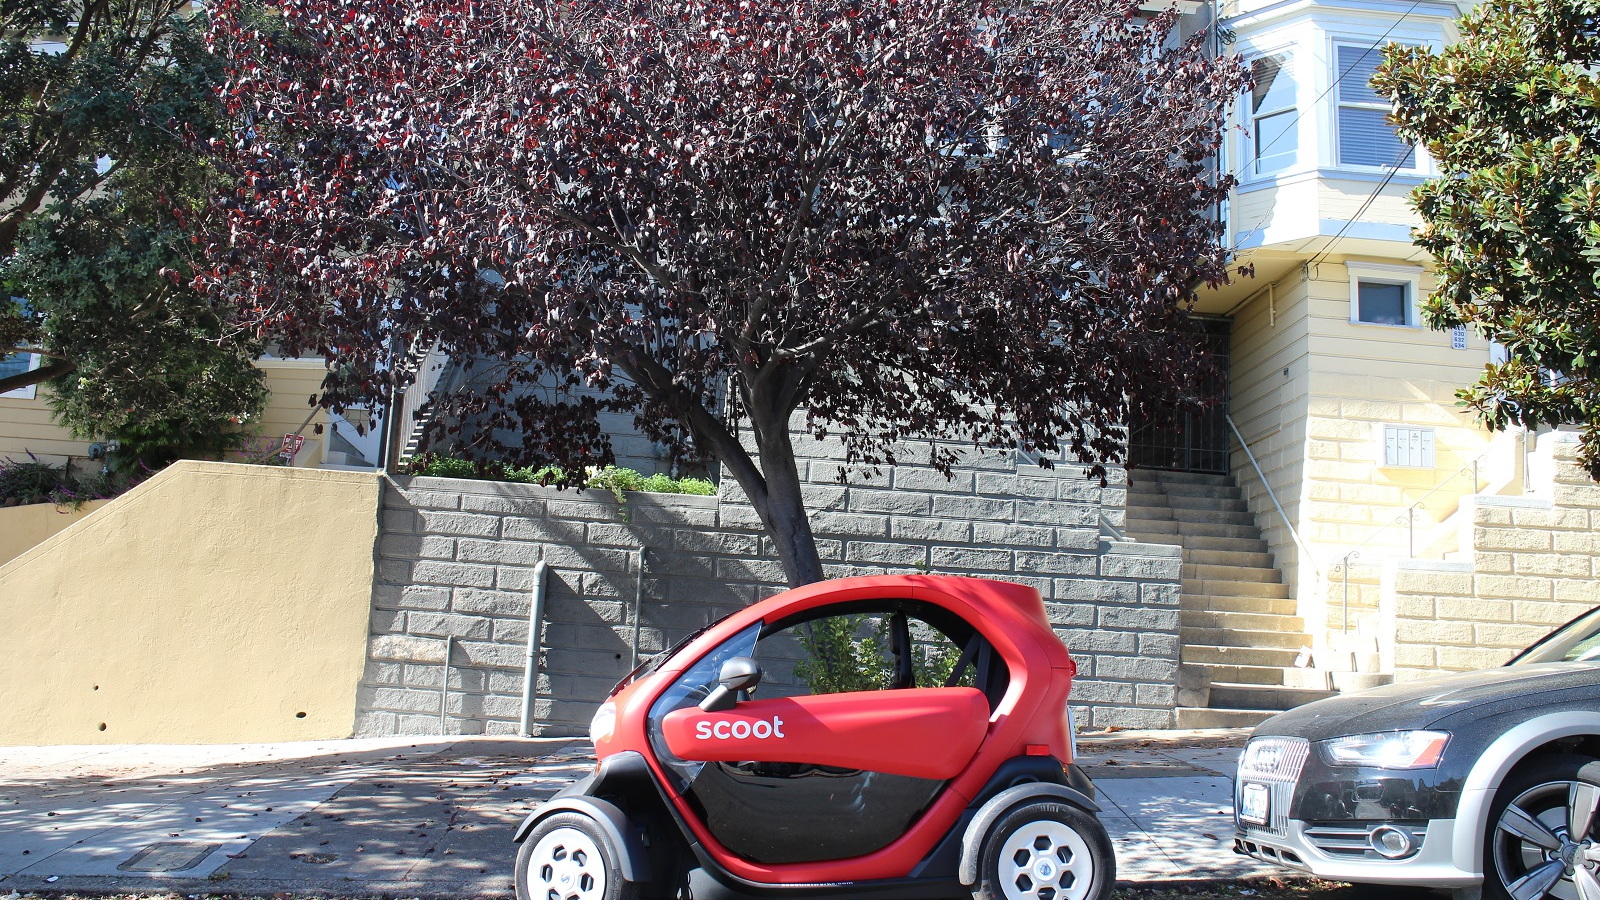 Scoot Quad (nee Renault Twizy) tested in San Francisco, Oct 2015